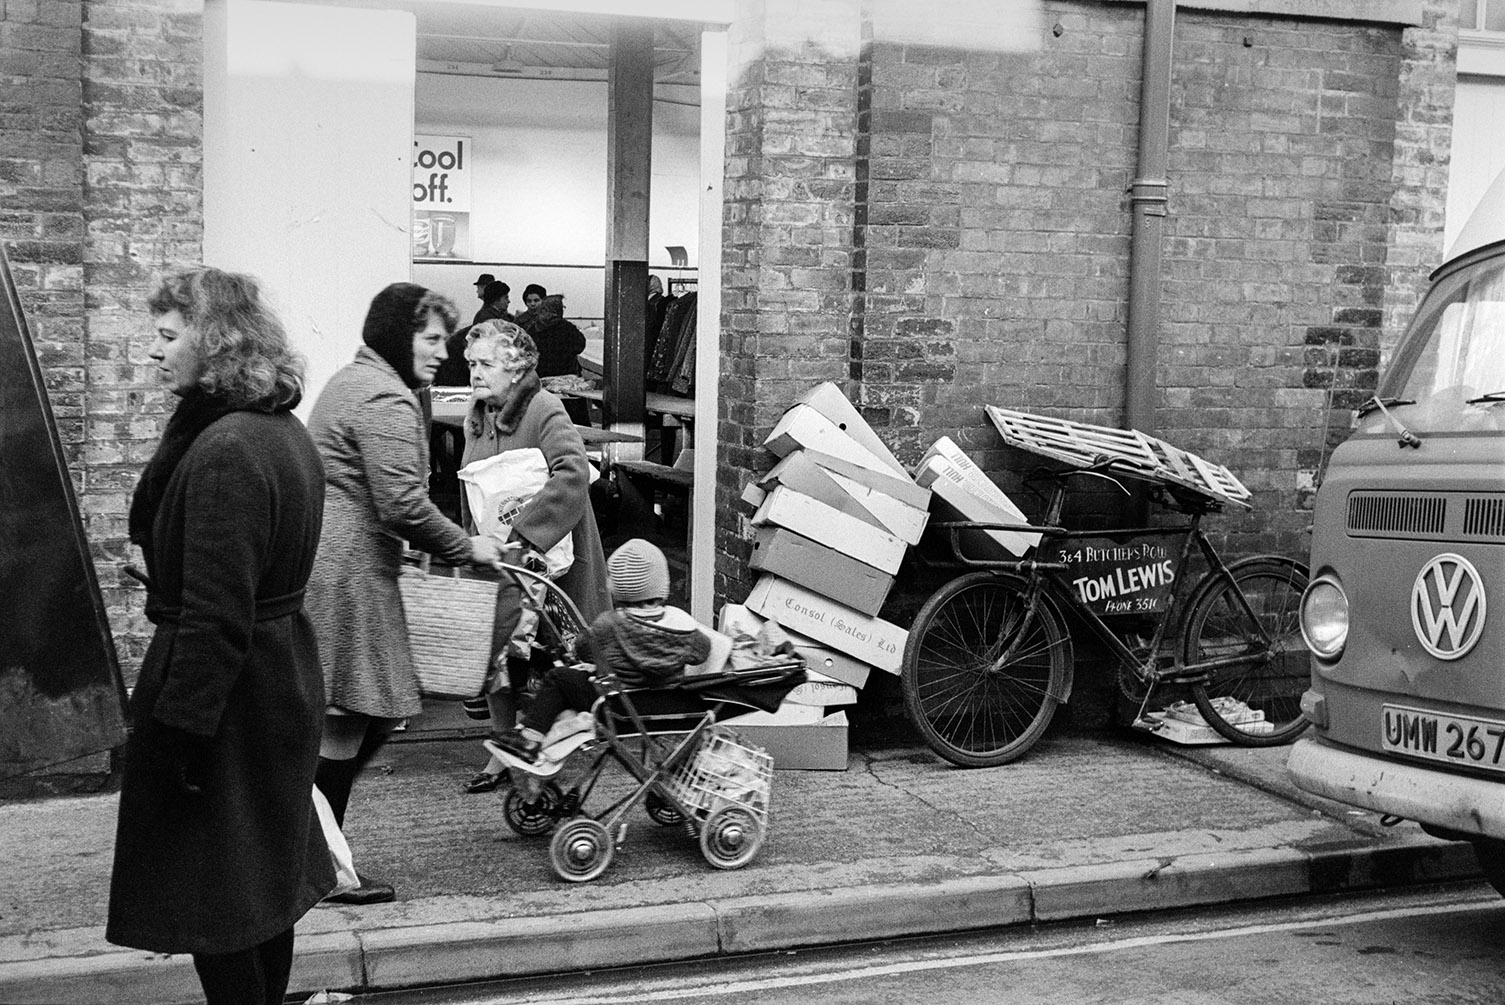 Women walking along a street outside Barnstaple Pannier Market. One woman is pushing a pram with a child, past some cardboard boxes and a parked bicycle.